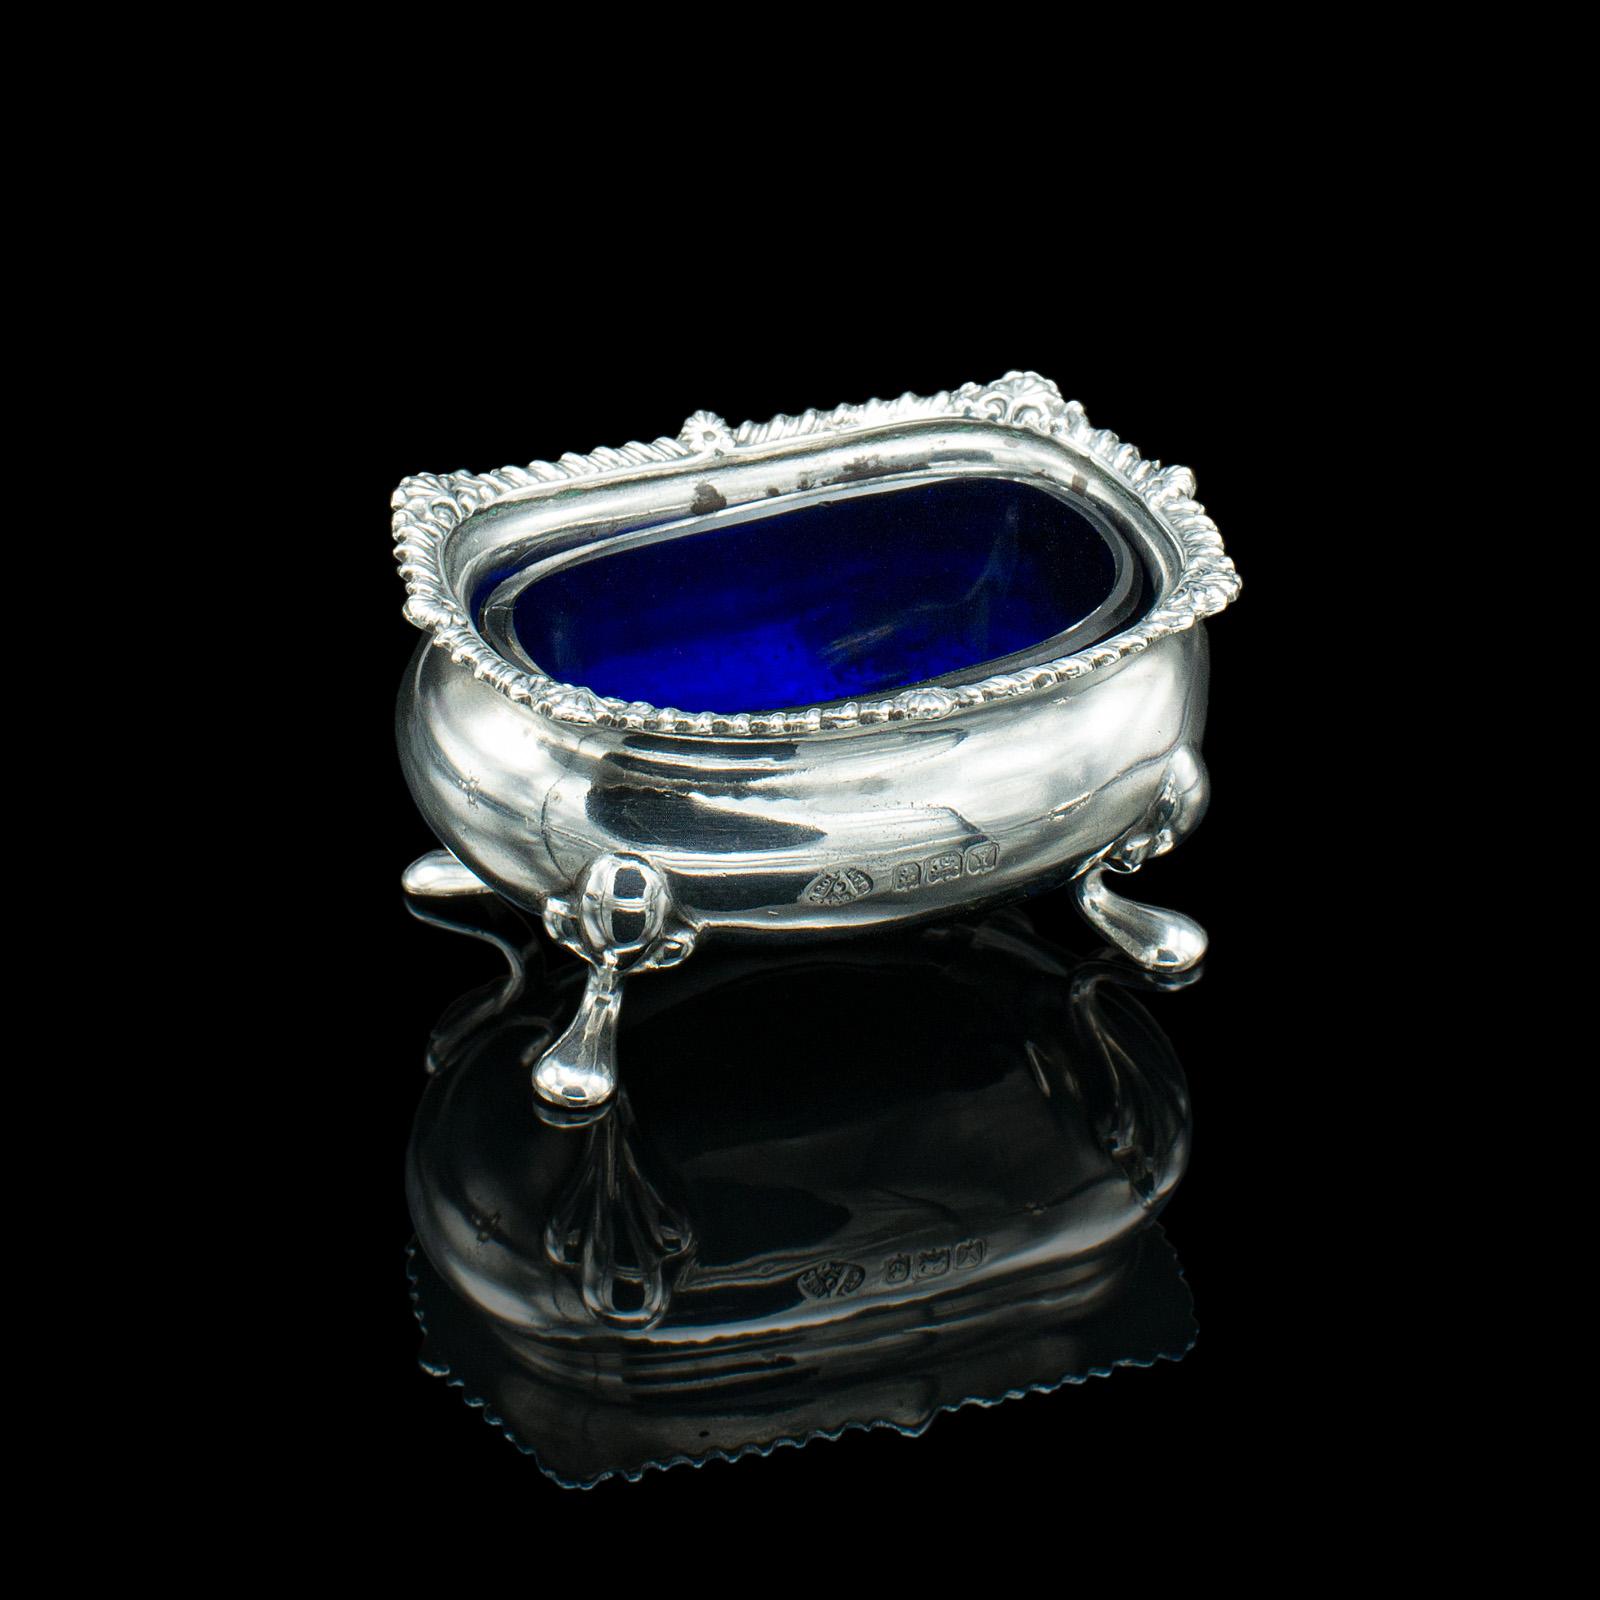 This is a vintage cased condiment set. An English, Sterling silver and cobalt glass tableware case, dating to the mid 20th century, hallmarked 1948.

Add a dash of silver to the dinner table with this appealing set
Displaying a desirable aged patina